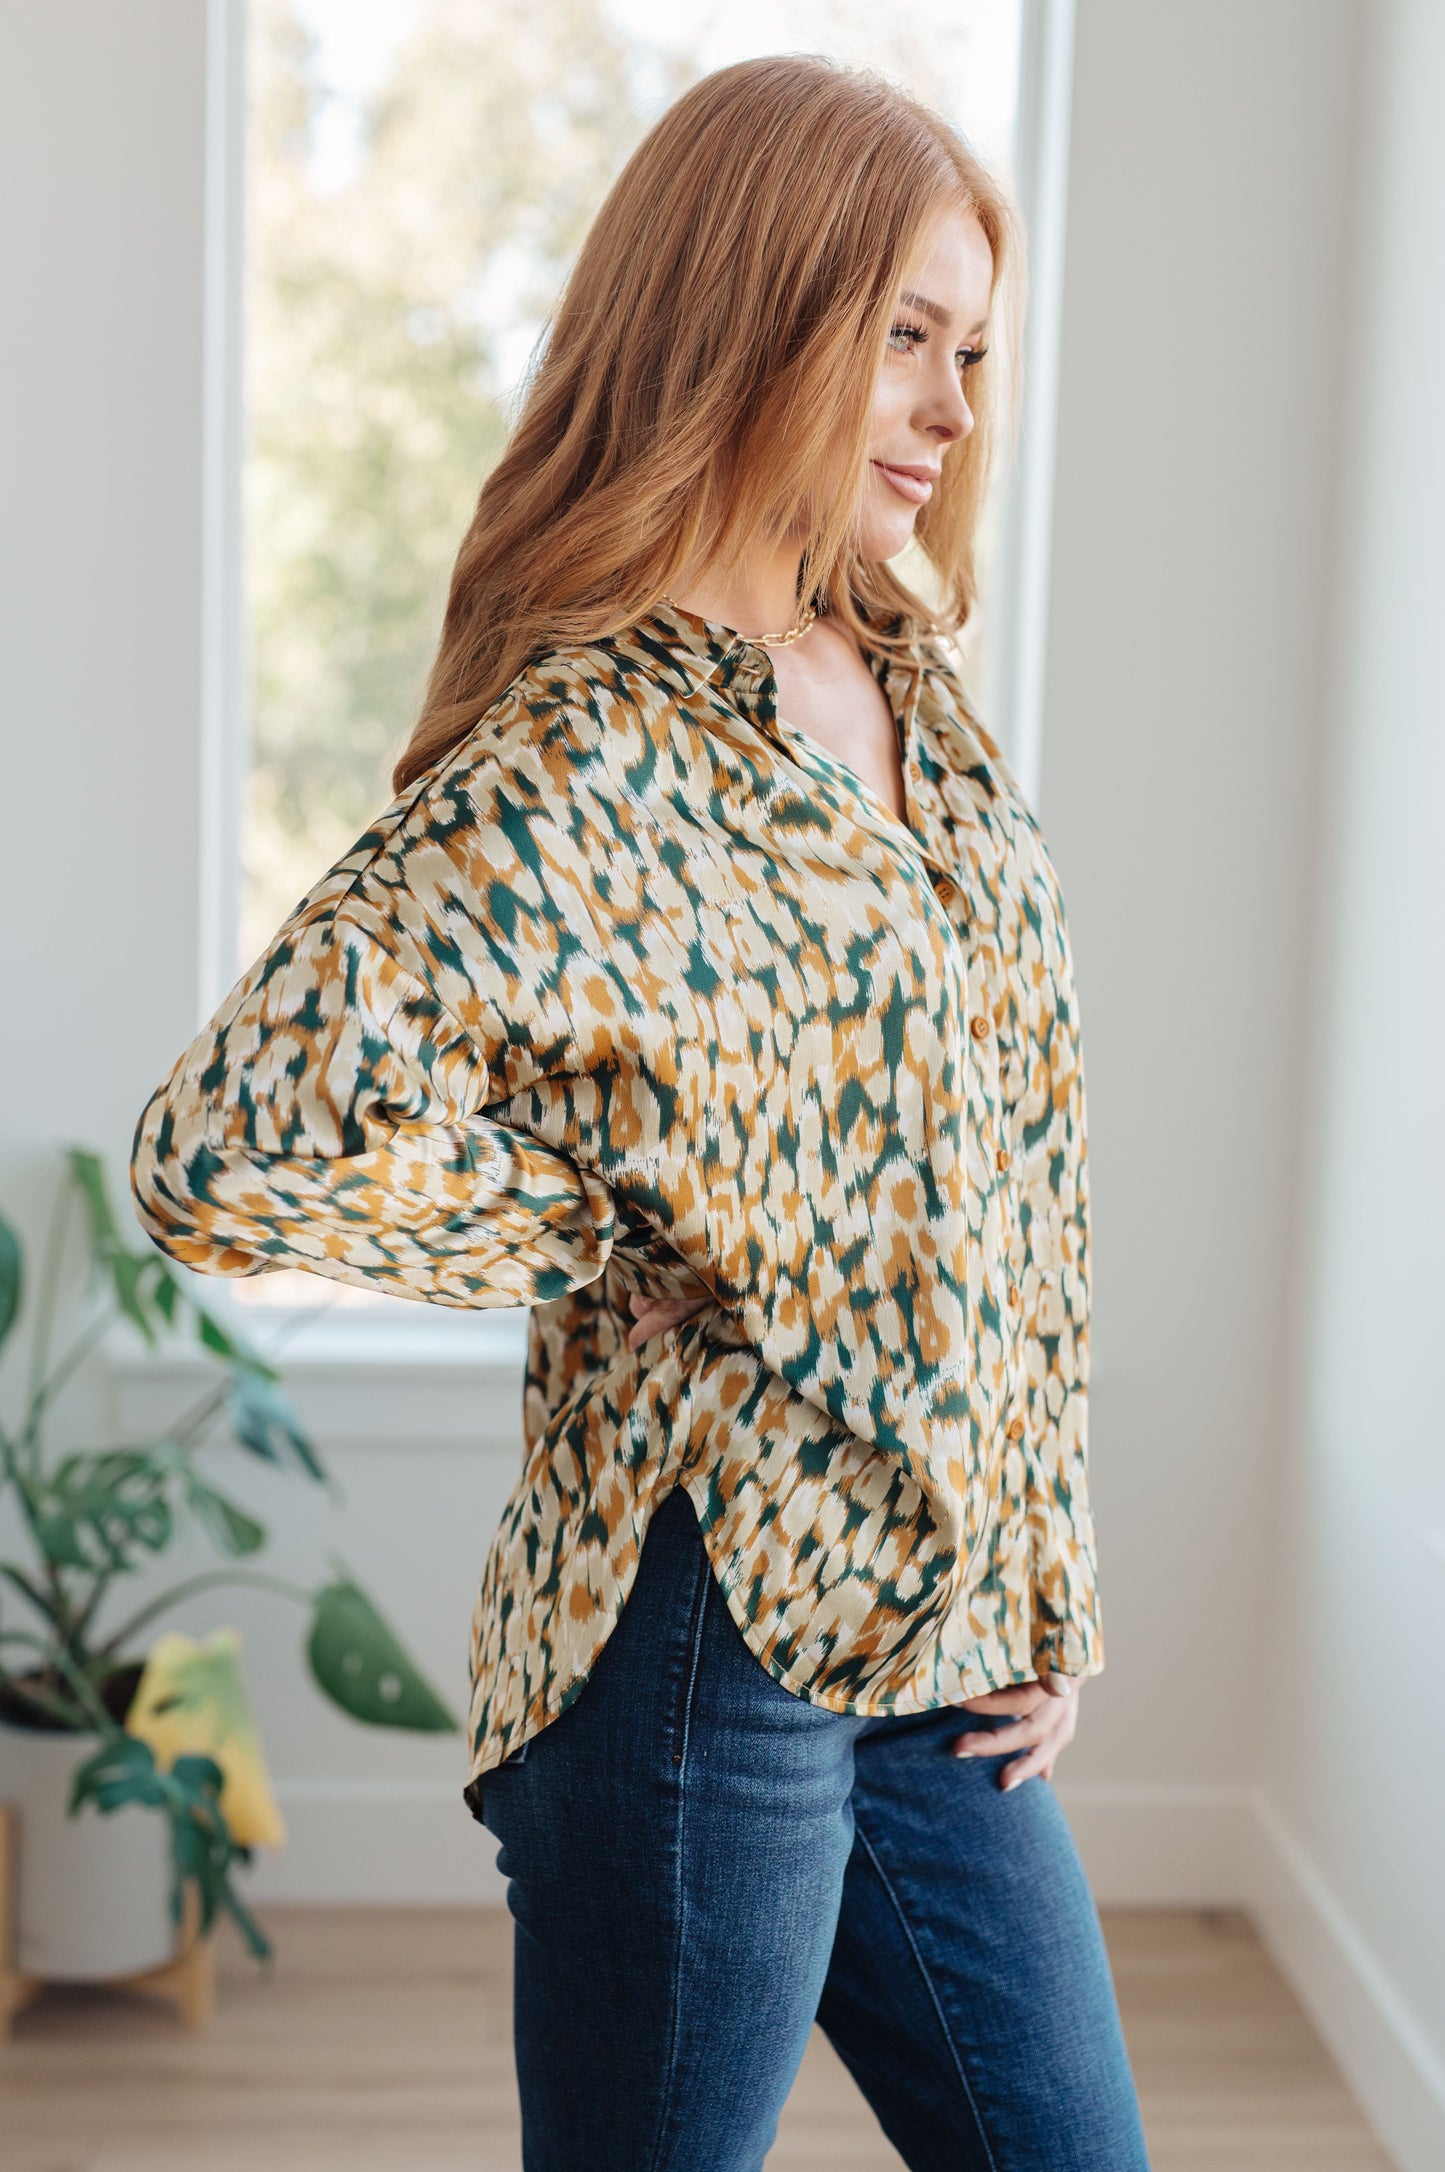 Introducing the In the Willows Button Up Blouse: created from luxurious poly satin for a stunning look that will have you feeling as confident as ever. This beautiful blouse features a collared neckline, button front fastening, and buttoned sleeve cuffs. With an elegant abstract print, this blouse will give you the perfect mix of modern and timeless style.